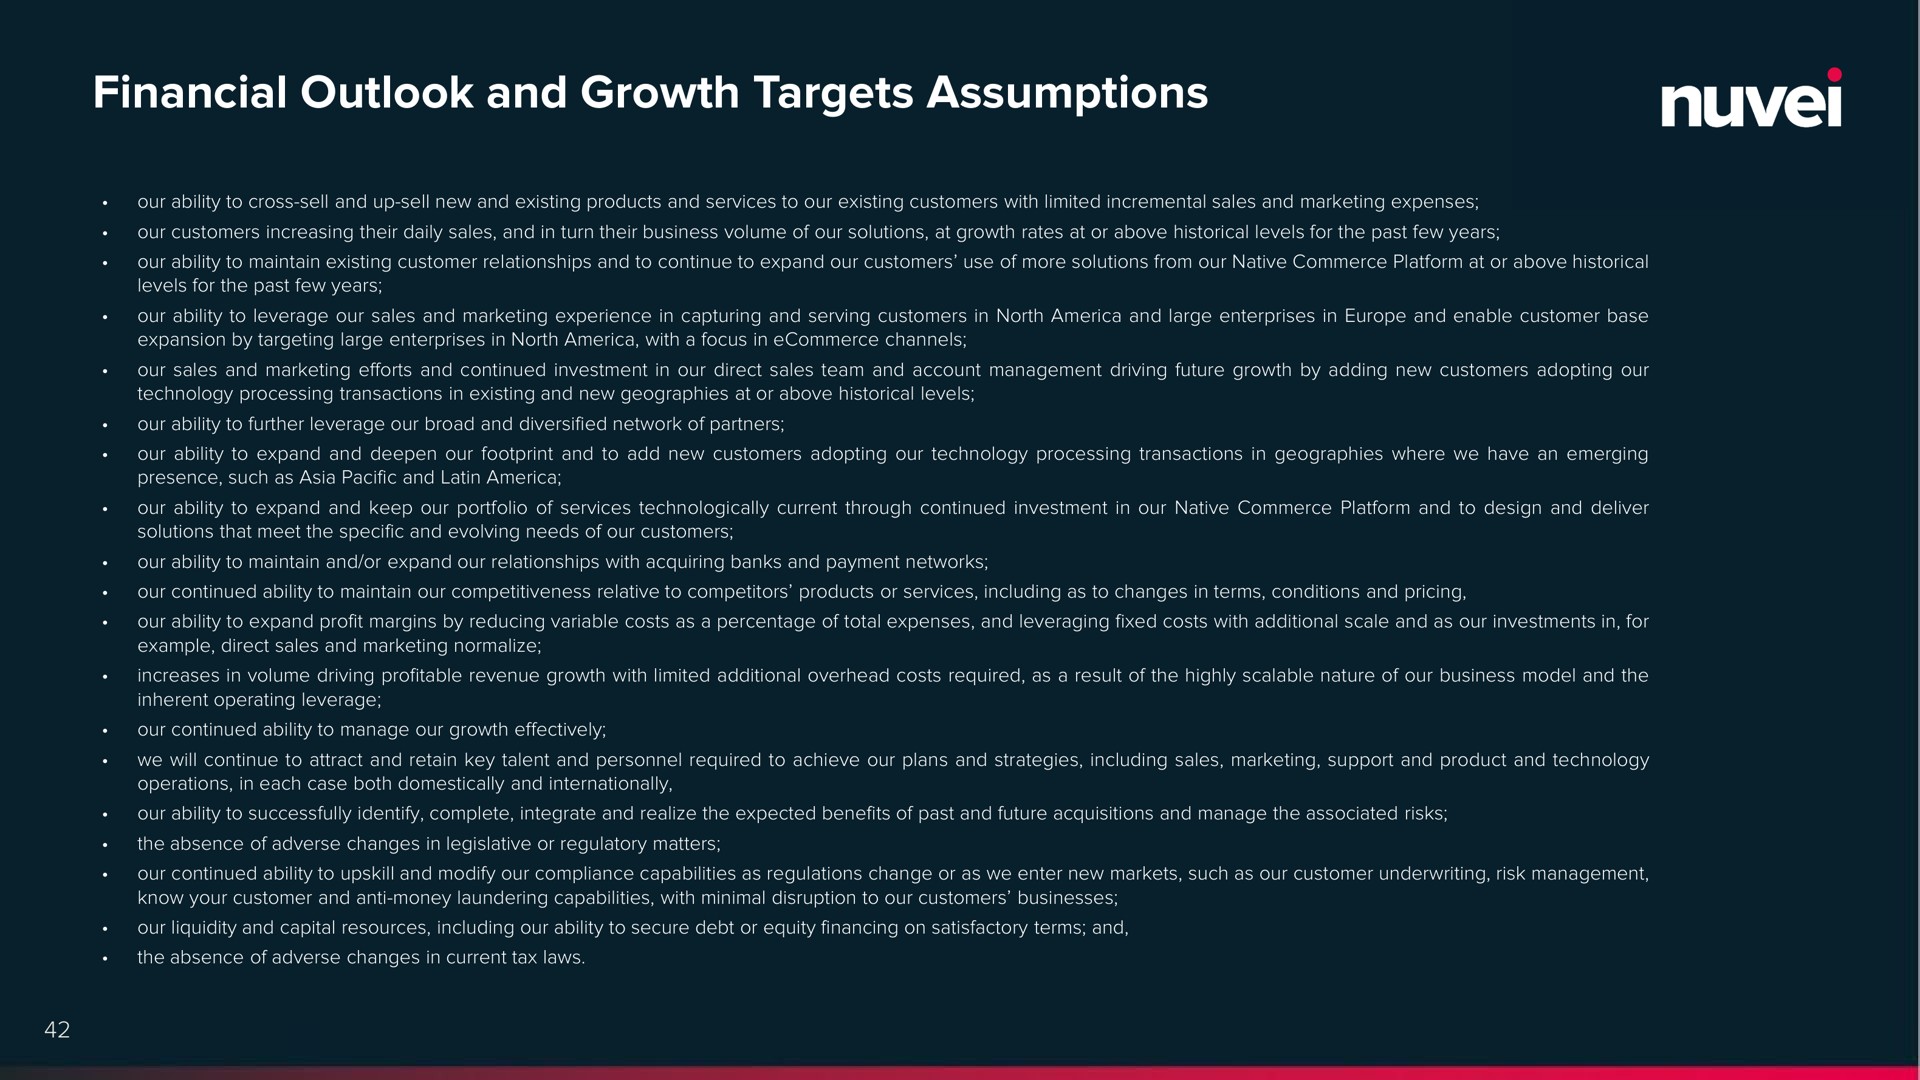 financial outlook and growth targets assumptions | Nuvei